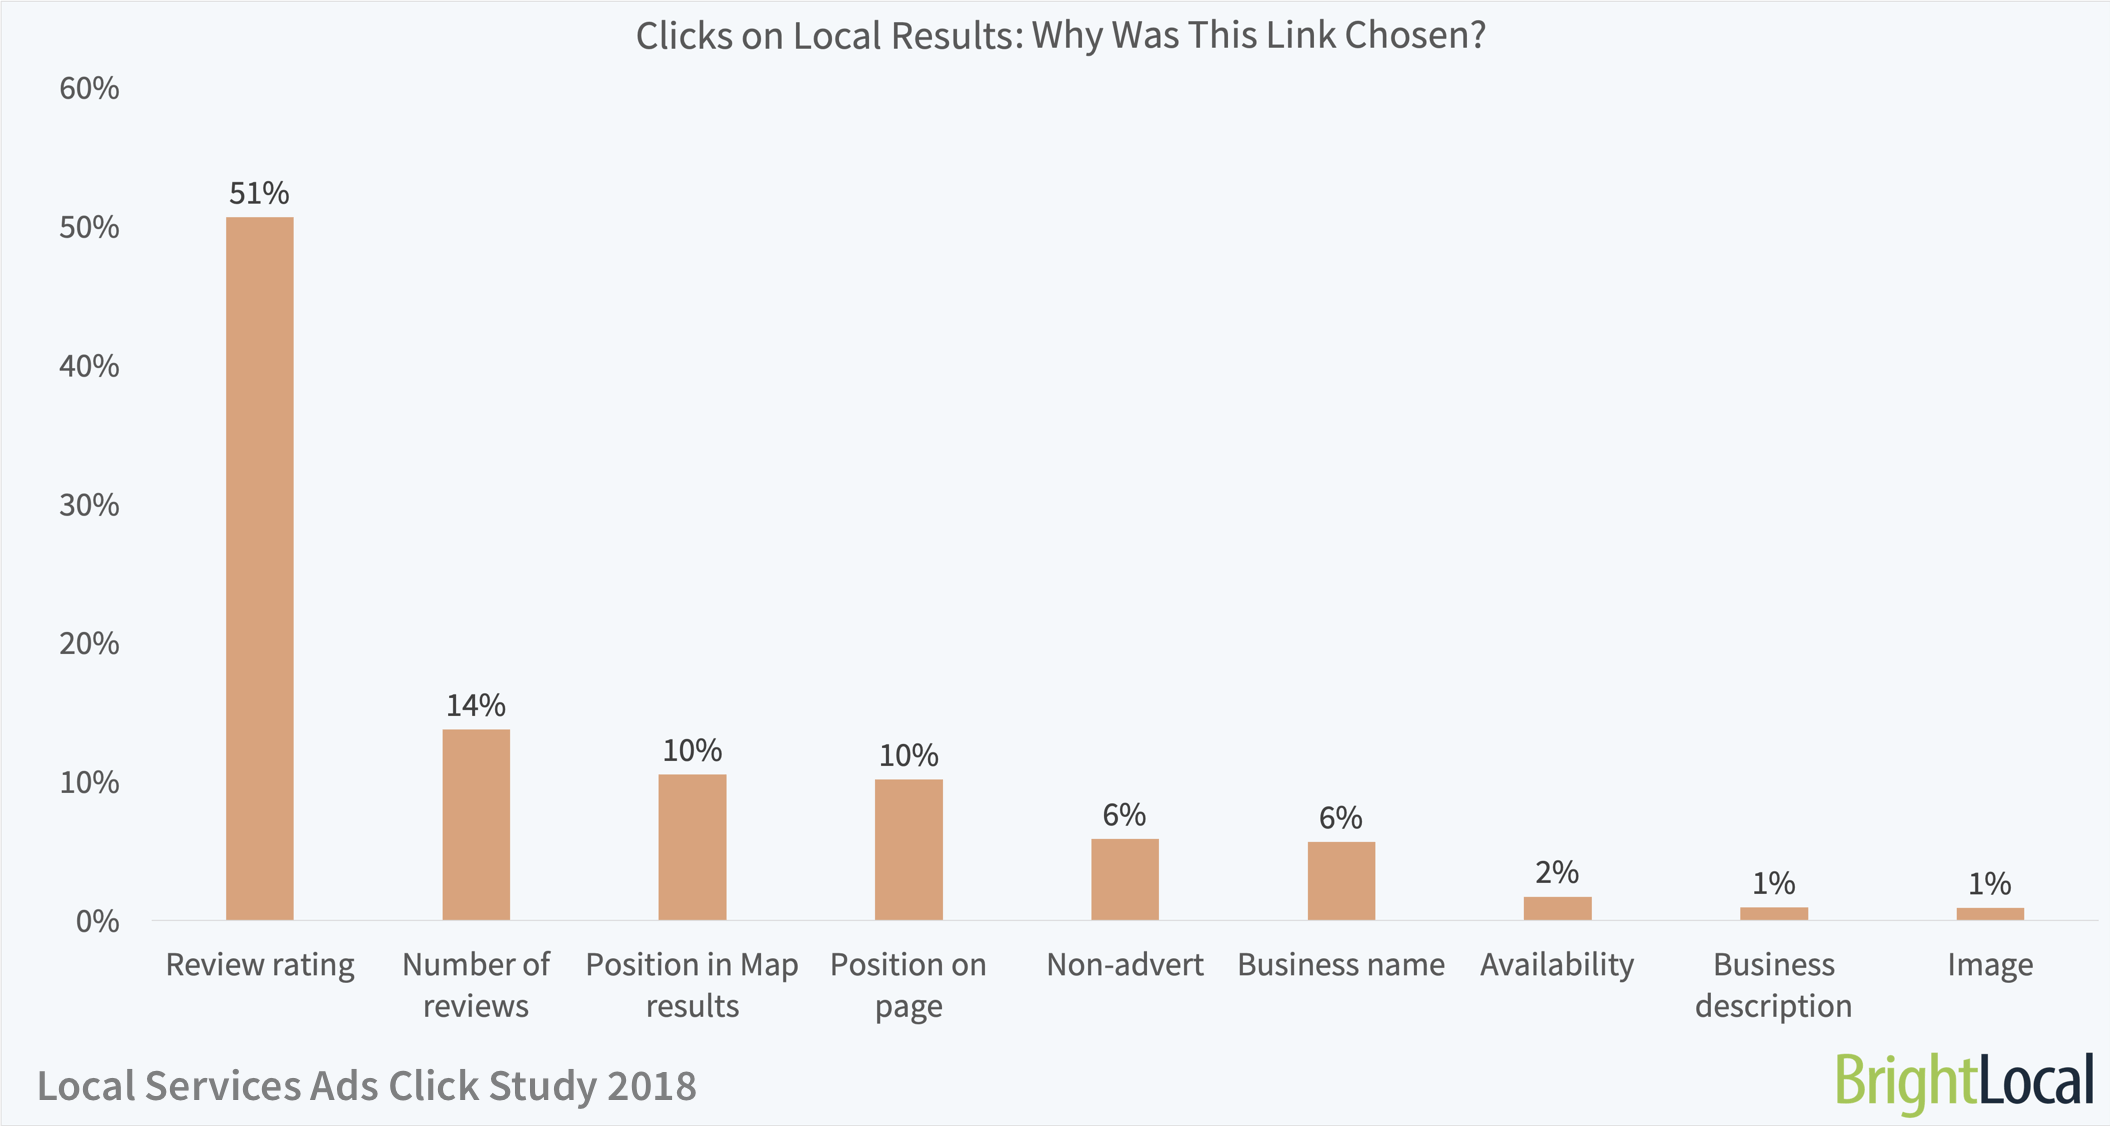 Local Services Ads Click Study | Reasons for Local SERP Clicks 